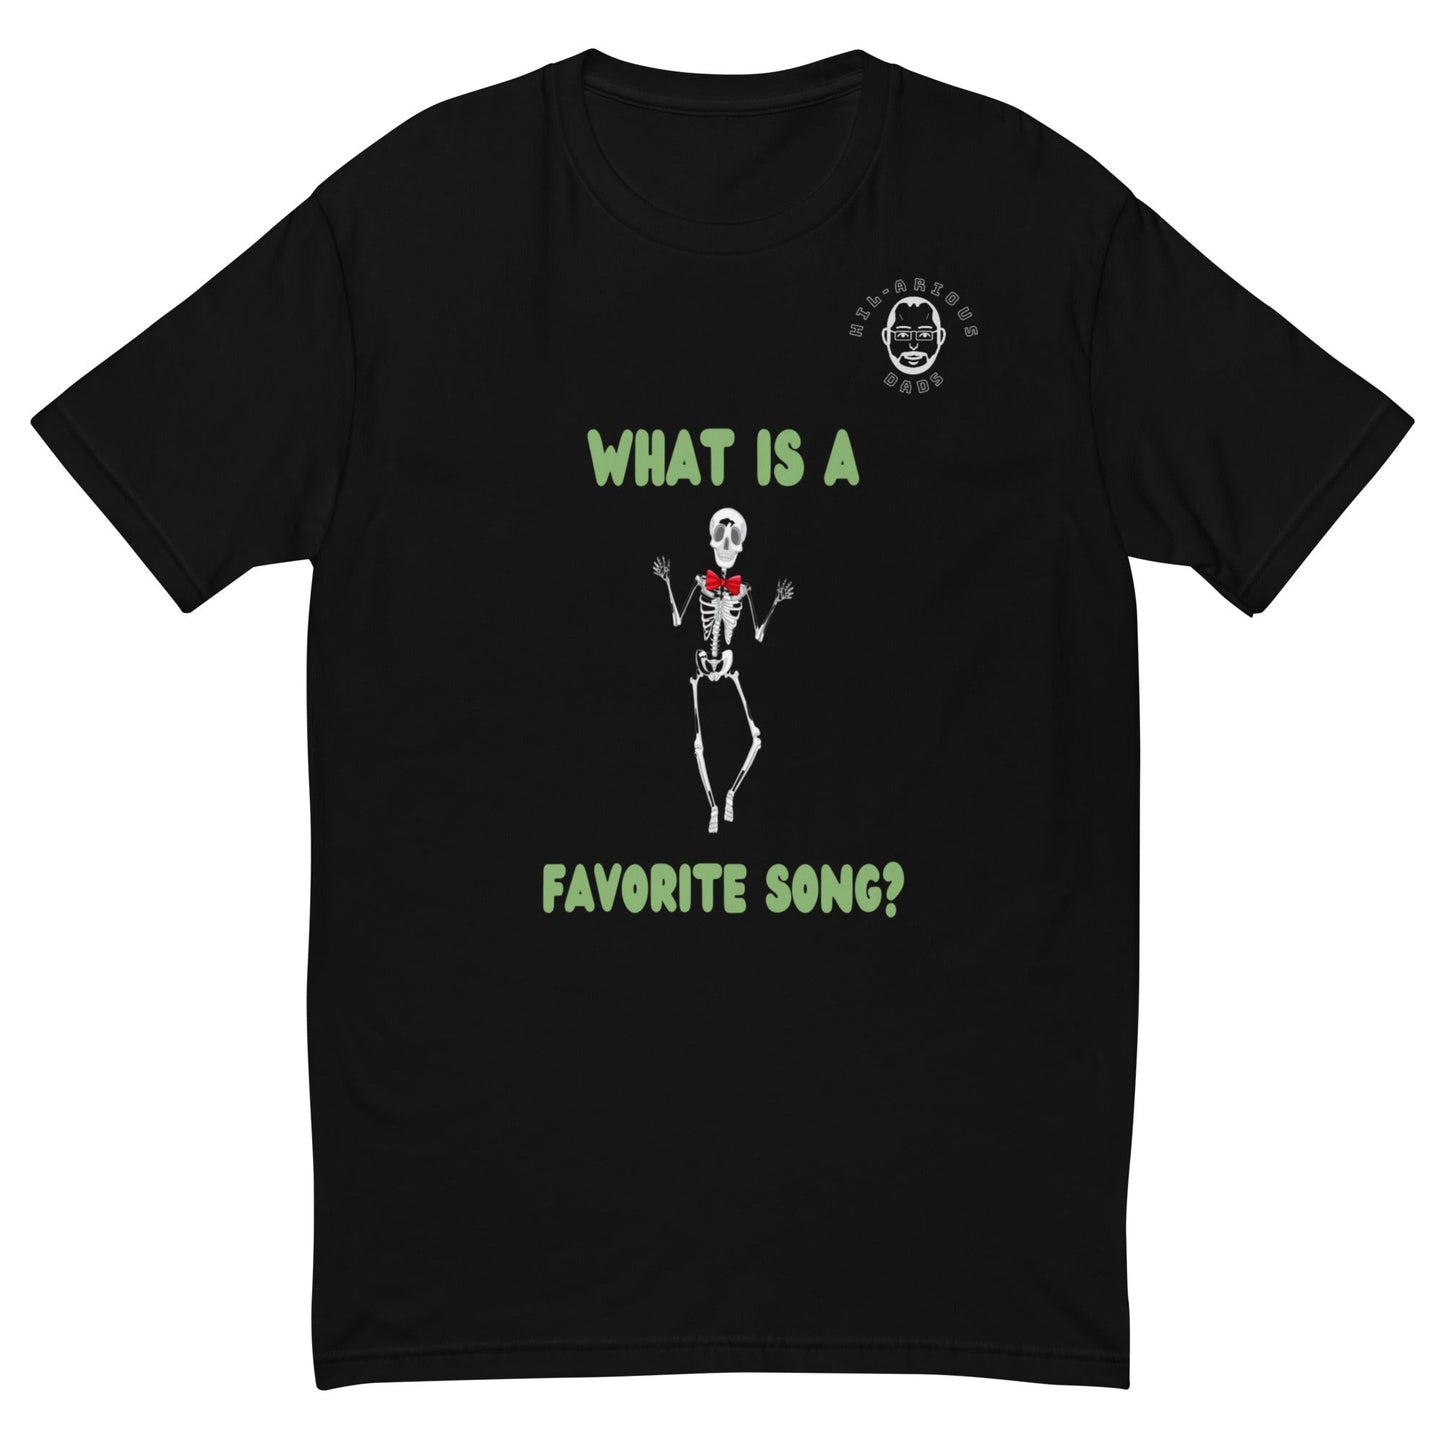 What is a skeleton favorite song?-T-shirt - Hil-arious Dads